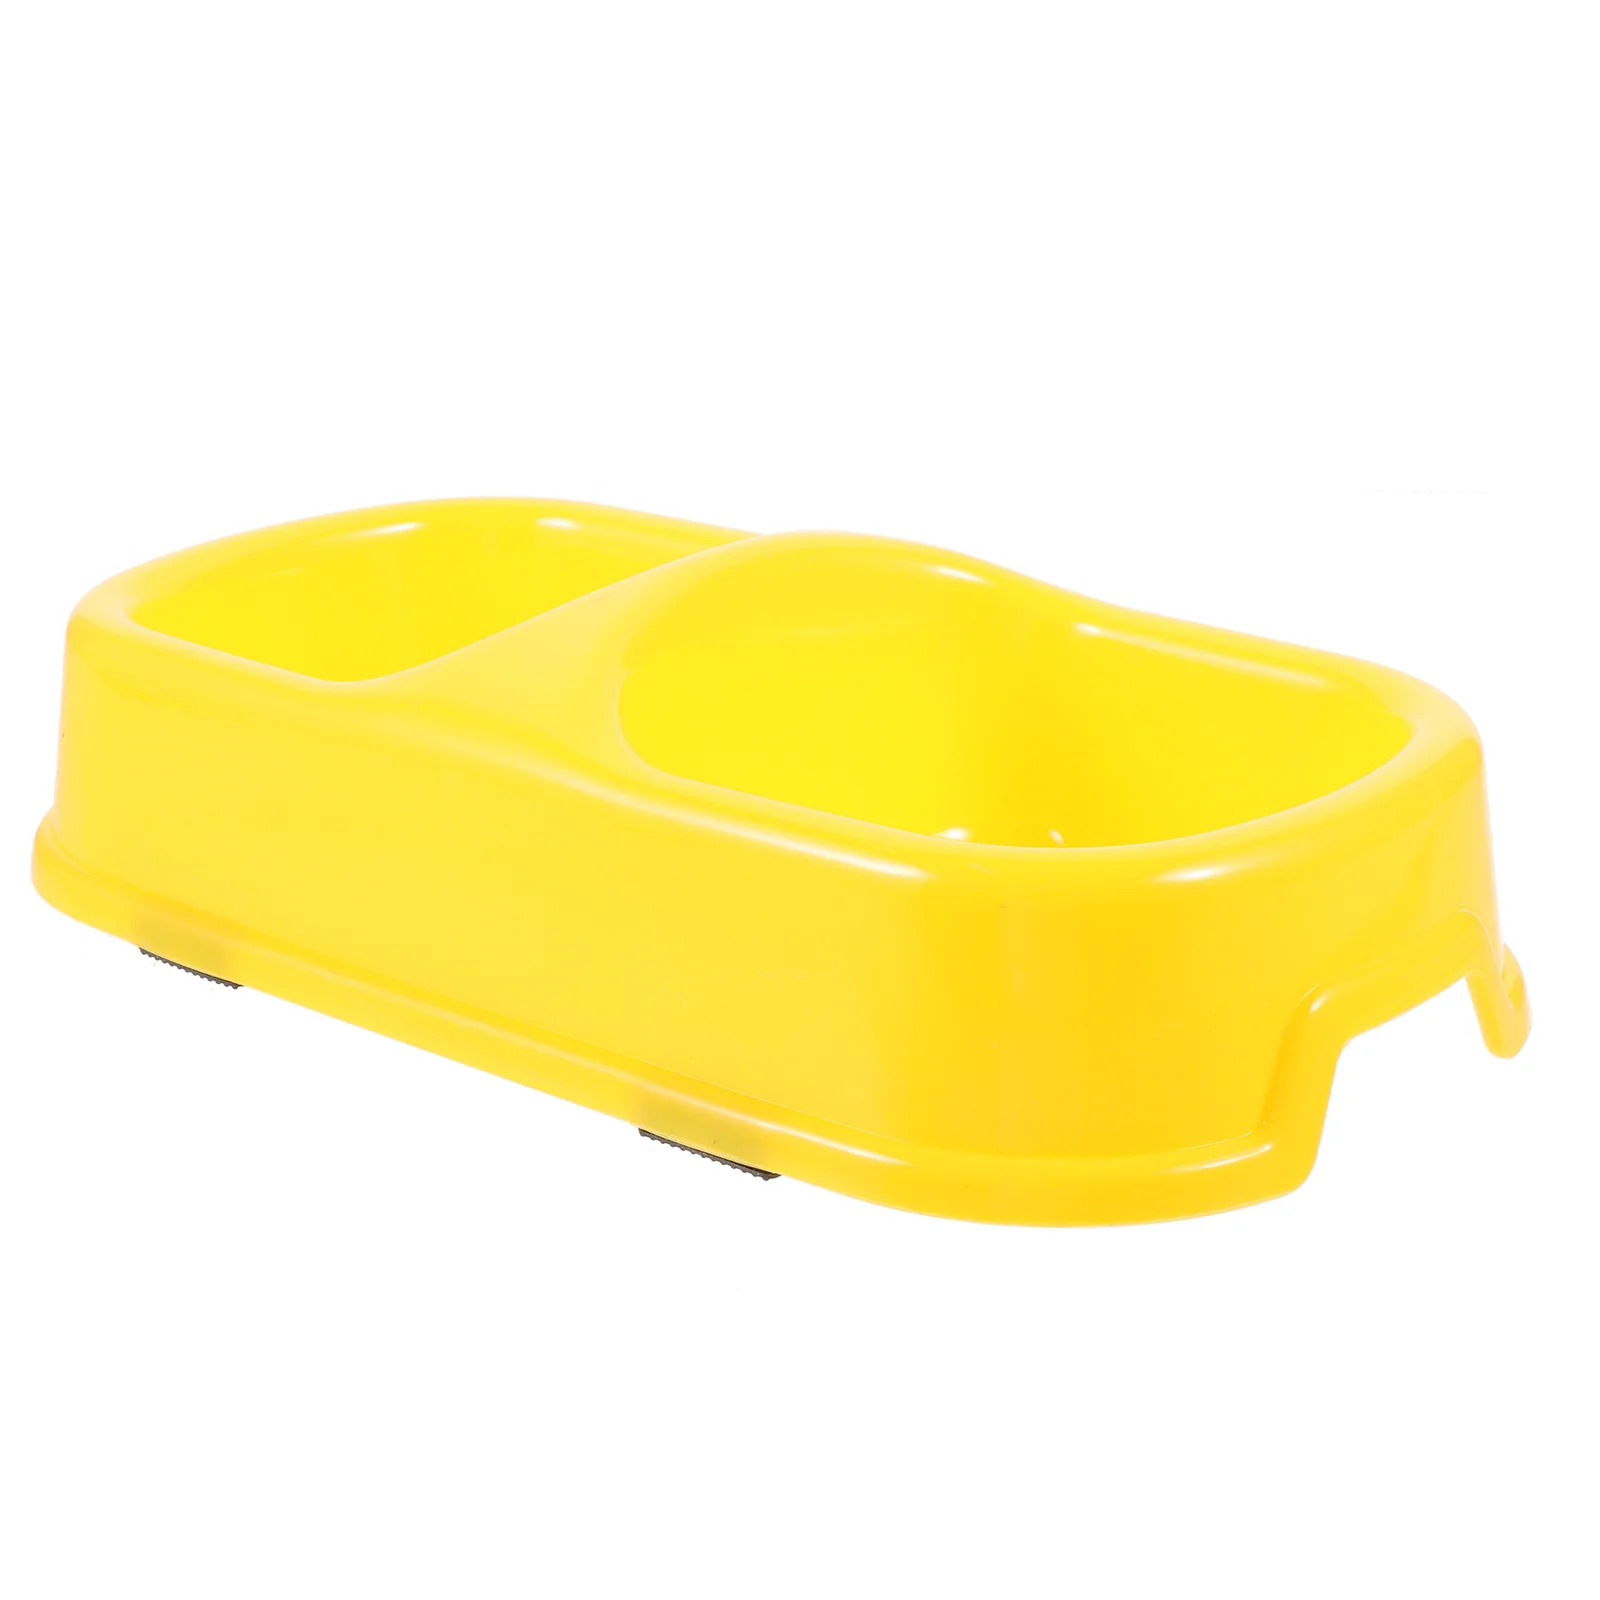 

Pet Supplies Dog Food Holder Bowl Printed Containers Puppy Feeder Anti-slip Bowls Feeding Non-skid Portable Practical